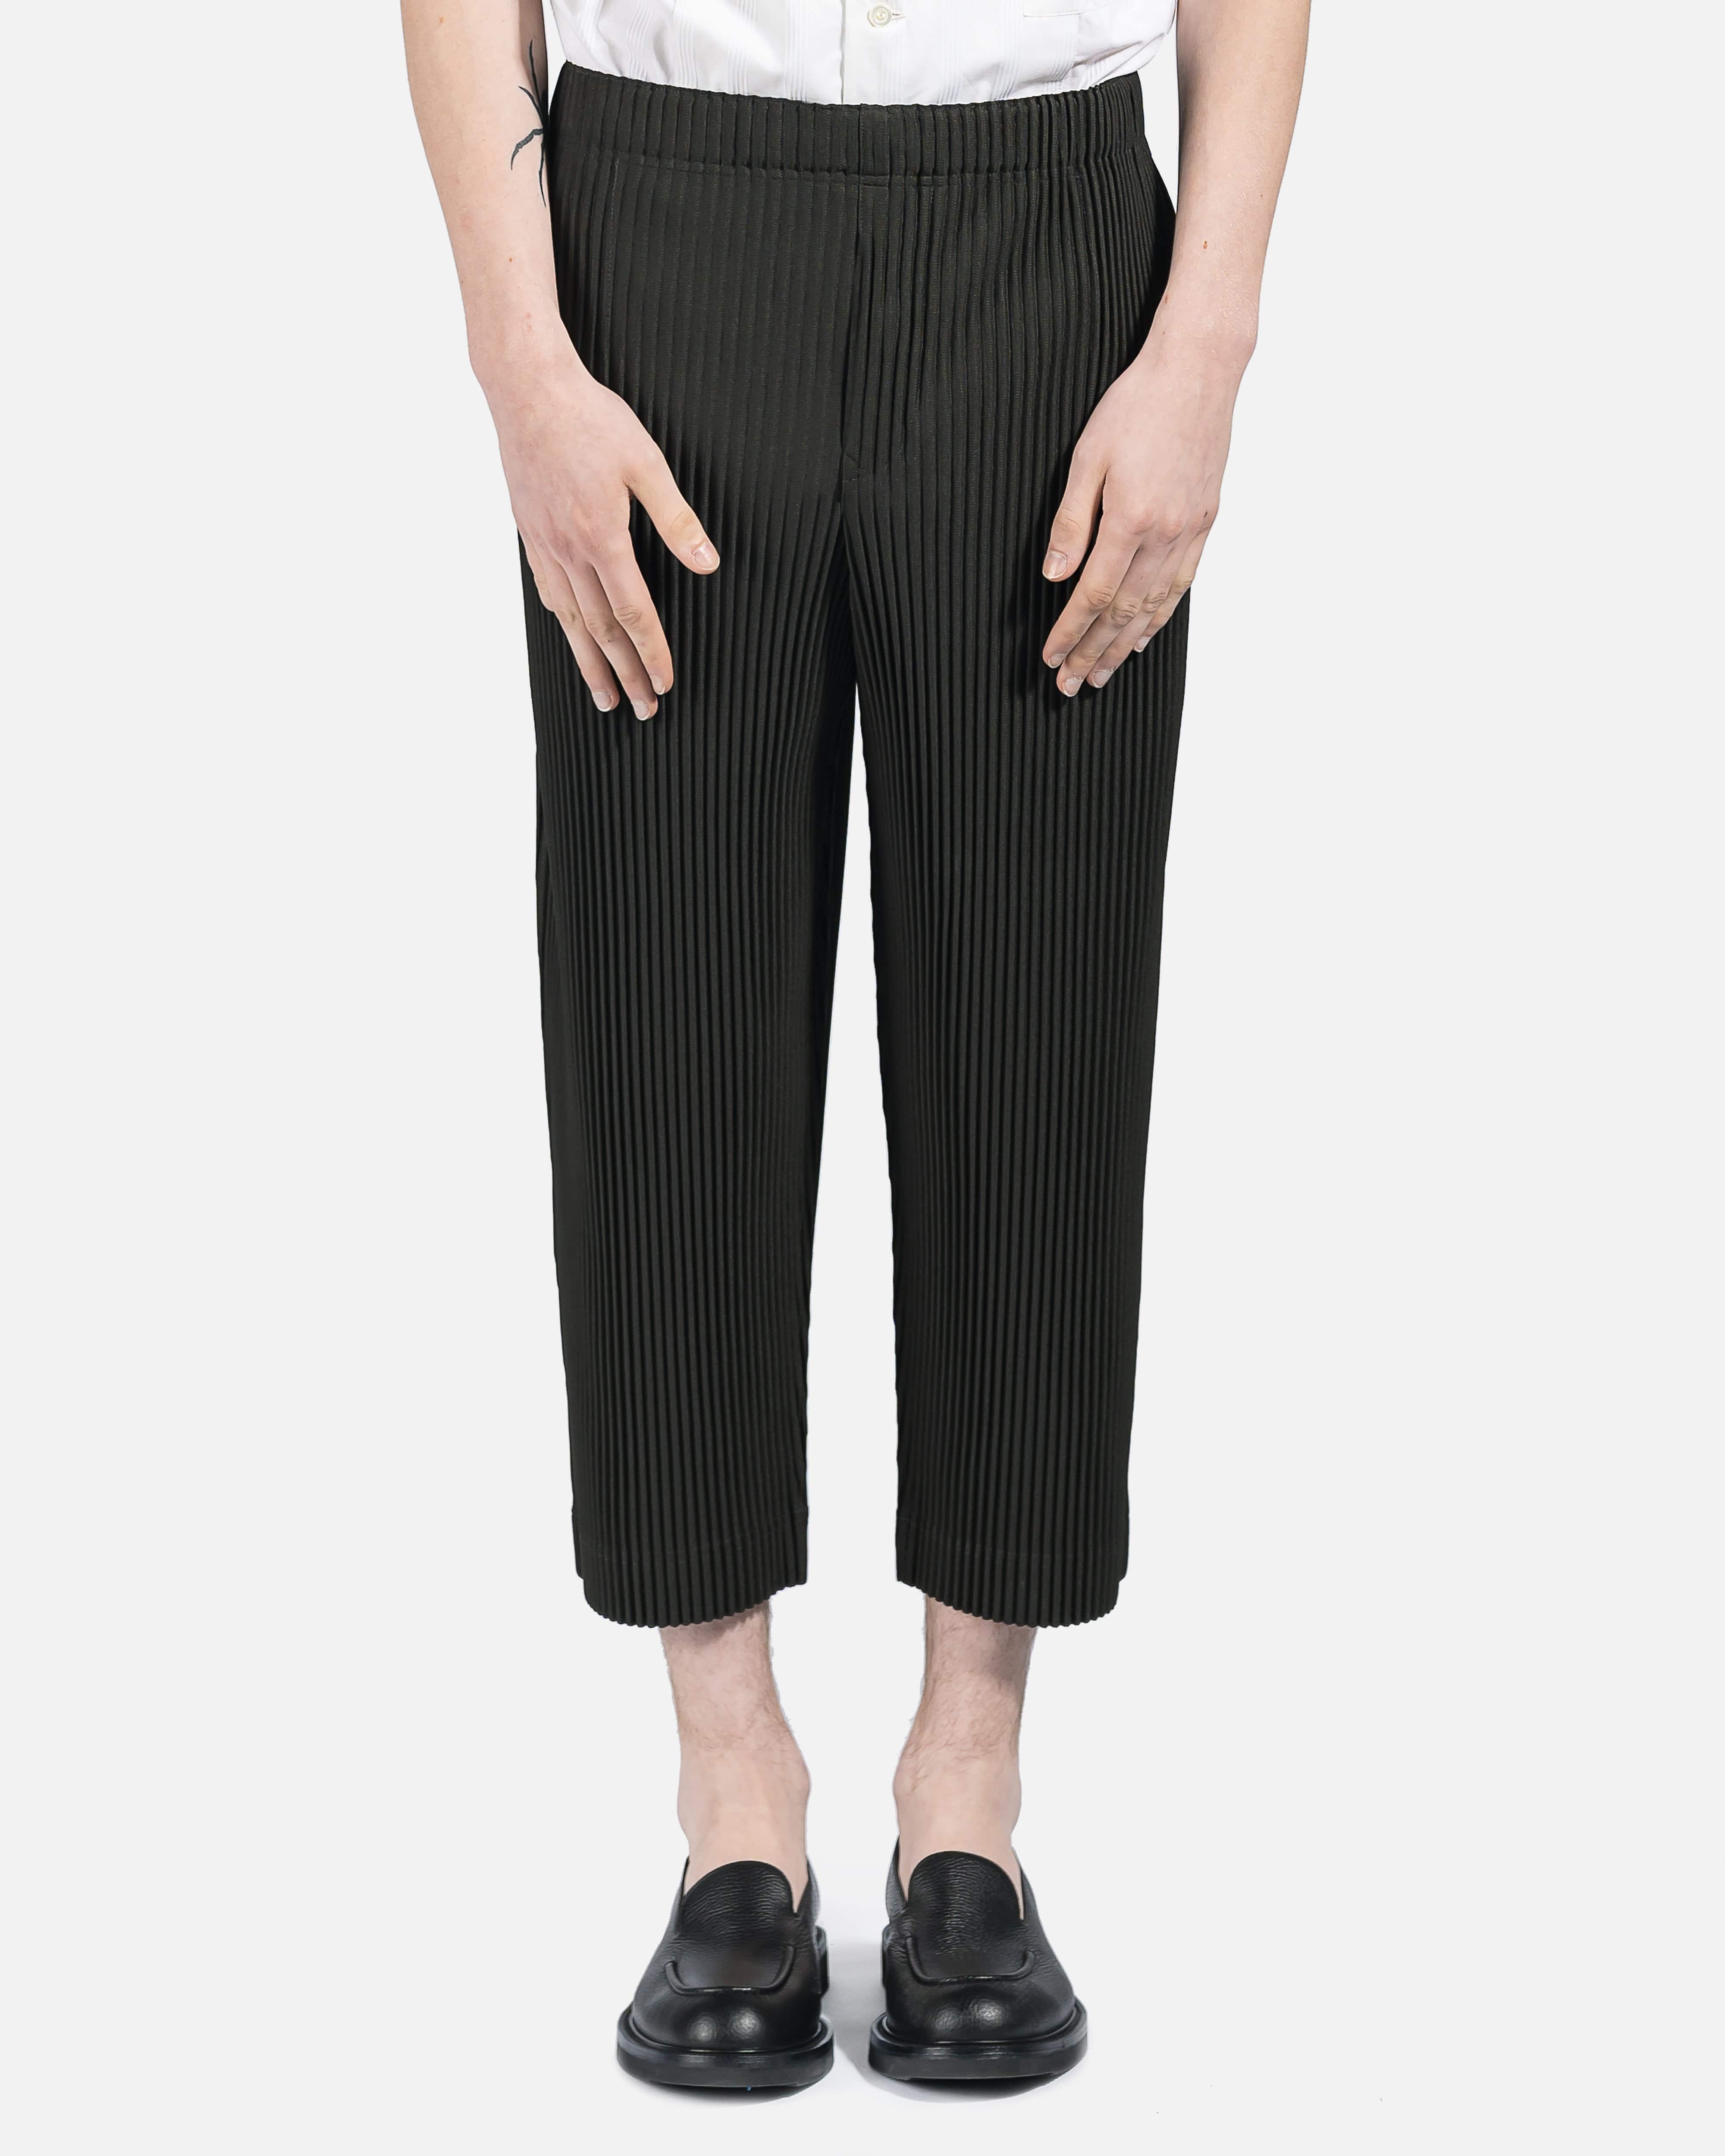 ISSEY MIYAKE PLEATED PANTS Mens Fashion Bottoms Trousers on Carousell